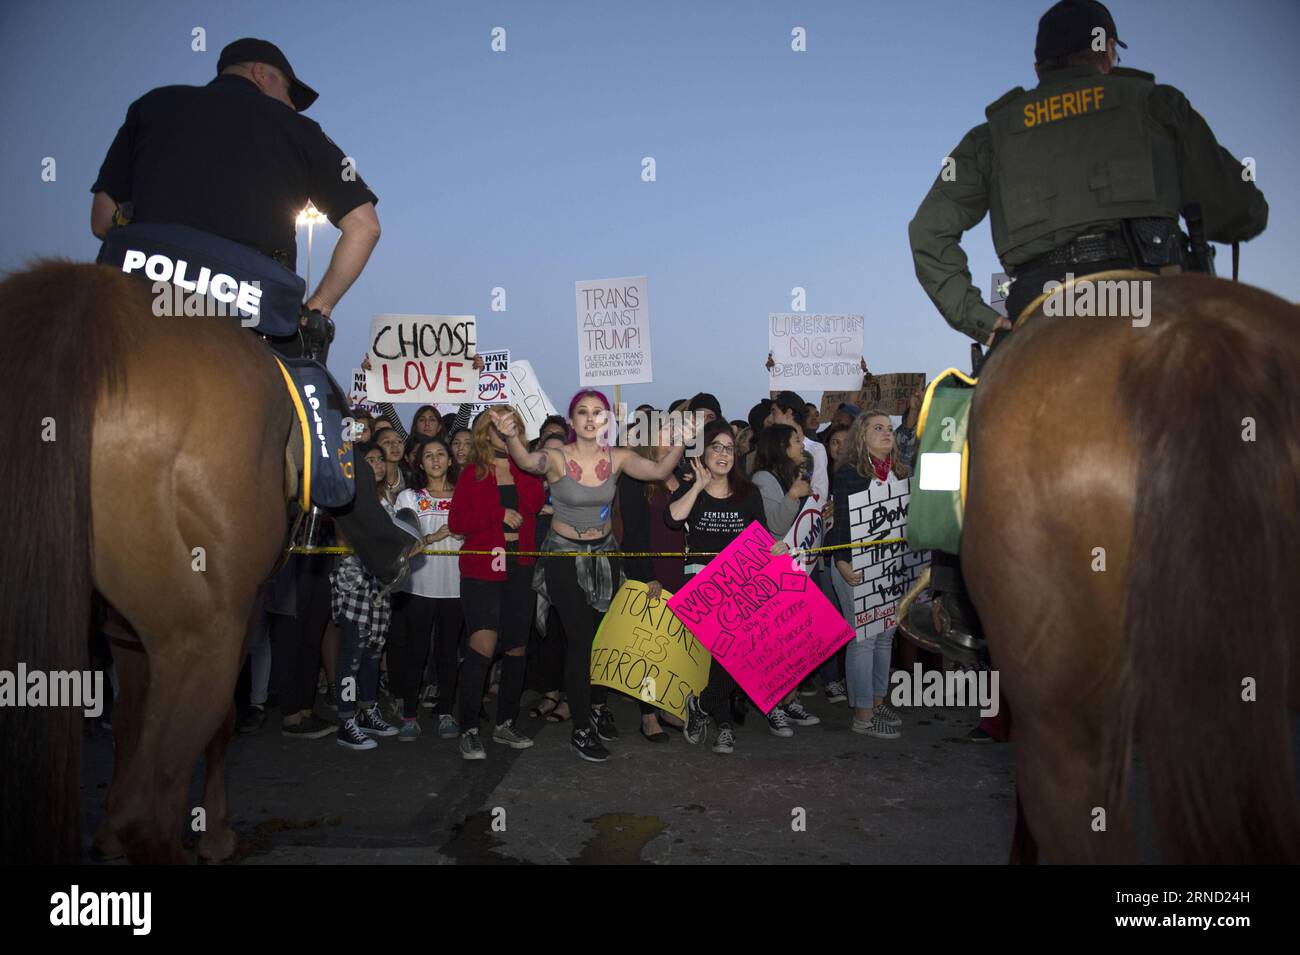 Protesters react outside a Donald Trump campaign rally in Orange County, southern California, April 28, 2016. Supporters and opponents of the Republican presidential front-runner Donald J. Trump confronted for a few hours on Thursday to express their different opinions. ) US-ORANGE COUNTY-TRUMP-PROTEST yangxlei PUBLICATIONxNOTxINxCHN   protesters react outside a Donald Trump Campaign Rally in Orange County Southern California April 28 2016 Supporters and opponents of The Republican Presidential Front Runner Donald J Trump confronted for a few Hours ON Thursday to Shipping their different opini Stock Photo